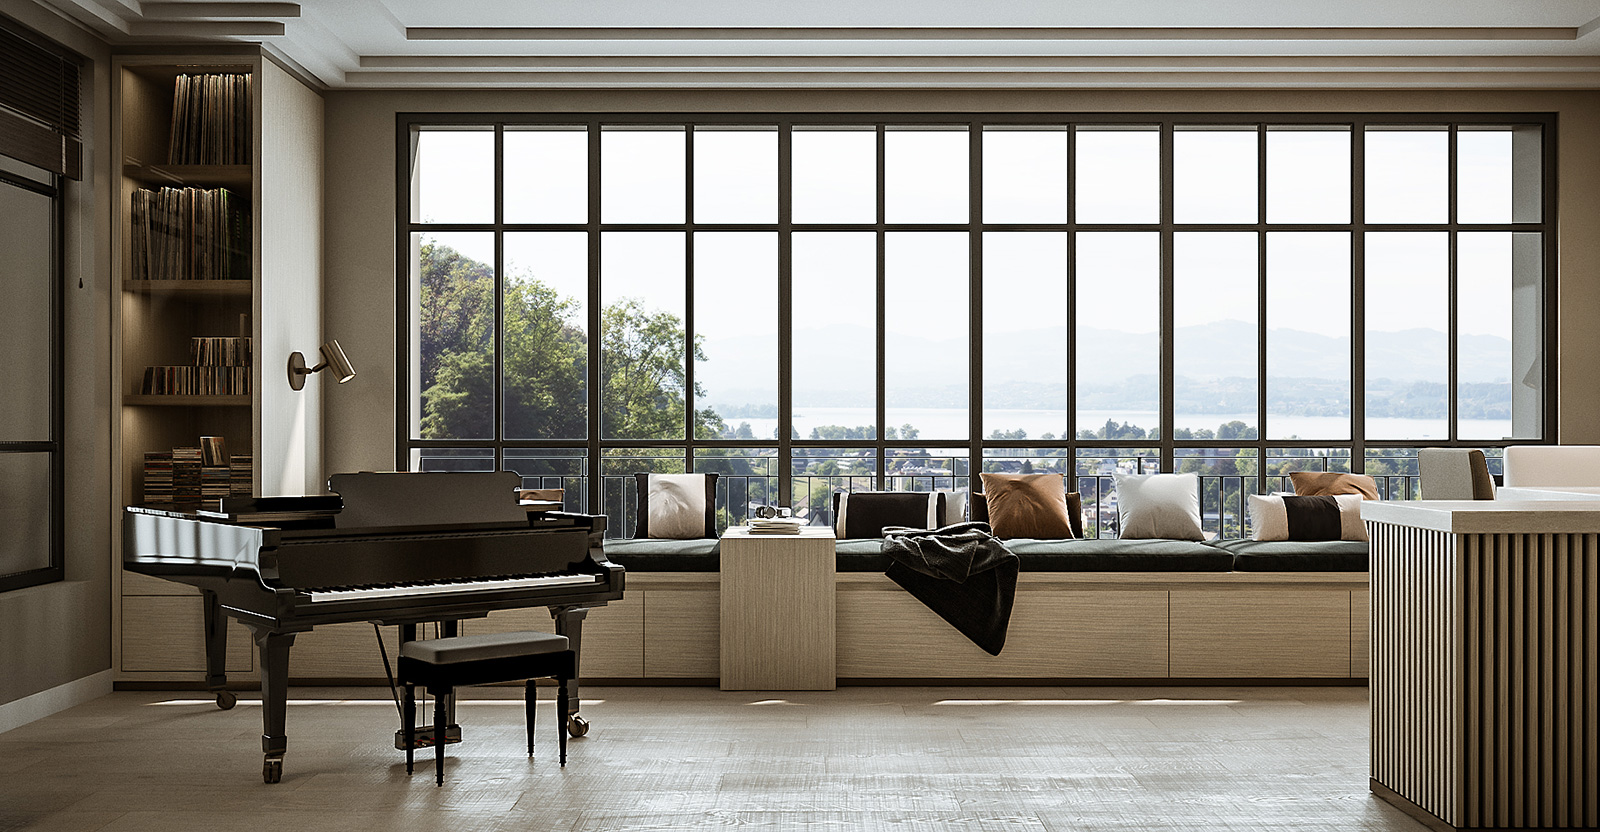 piano room with black piano, seating bench below the vast window facing the lake